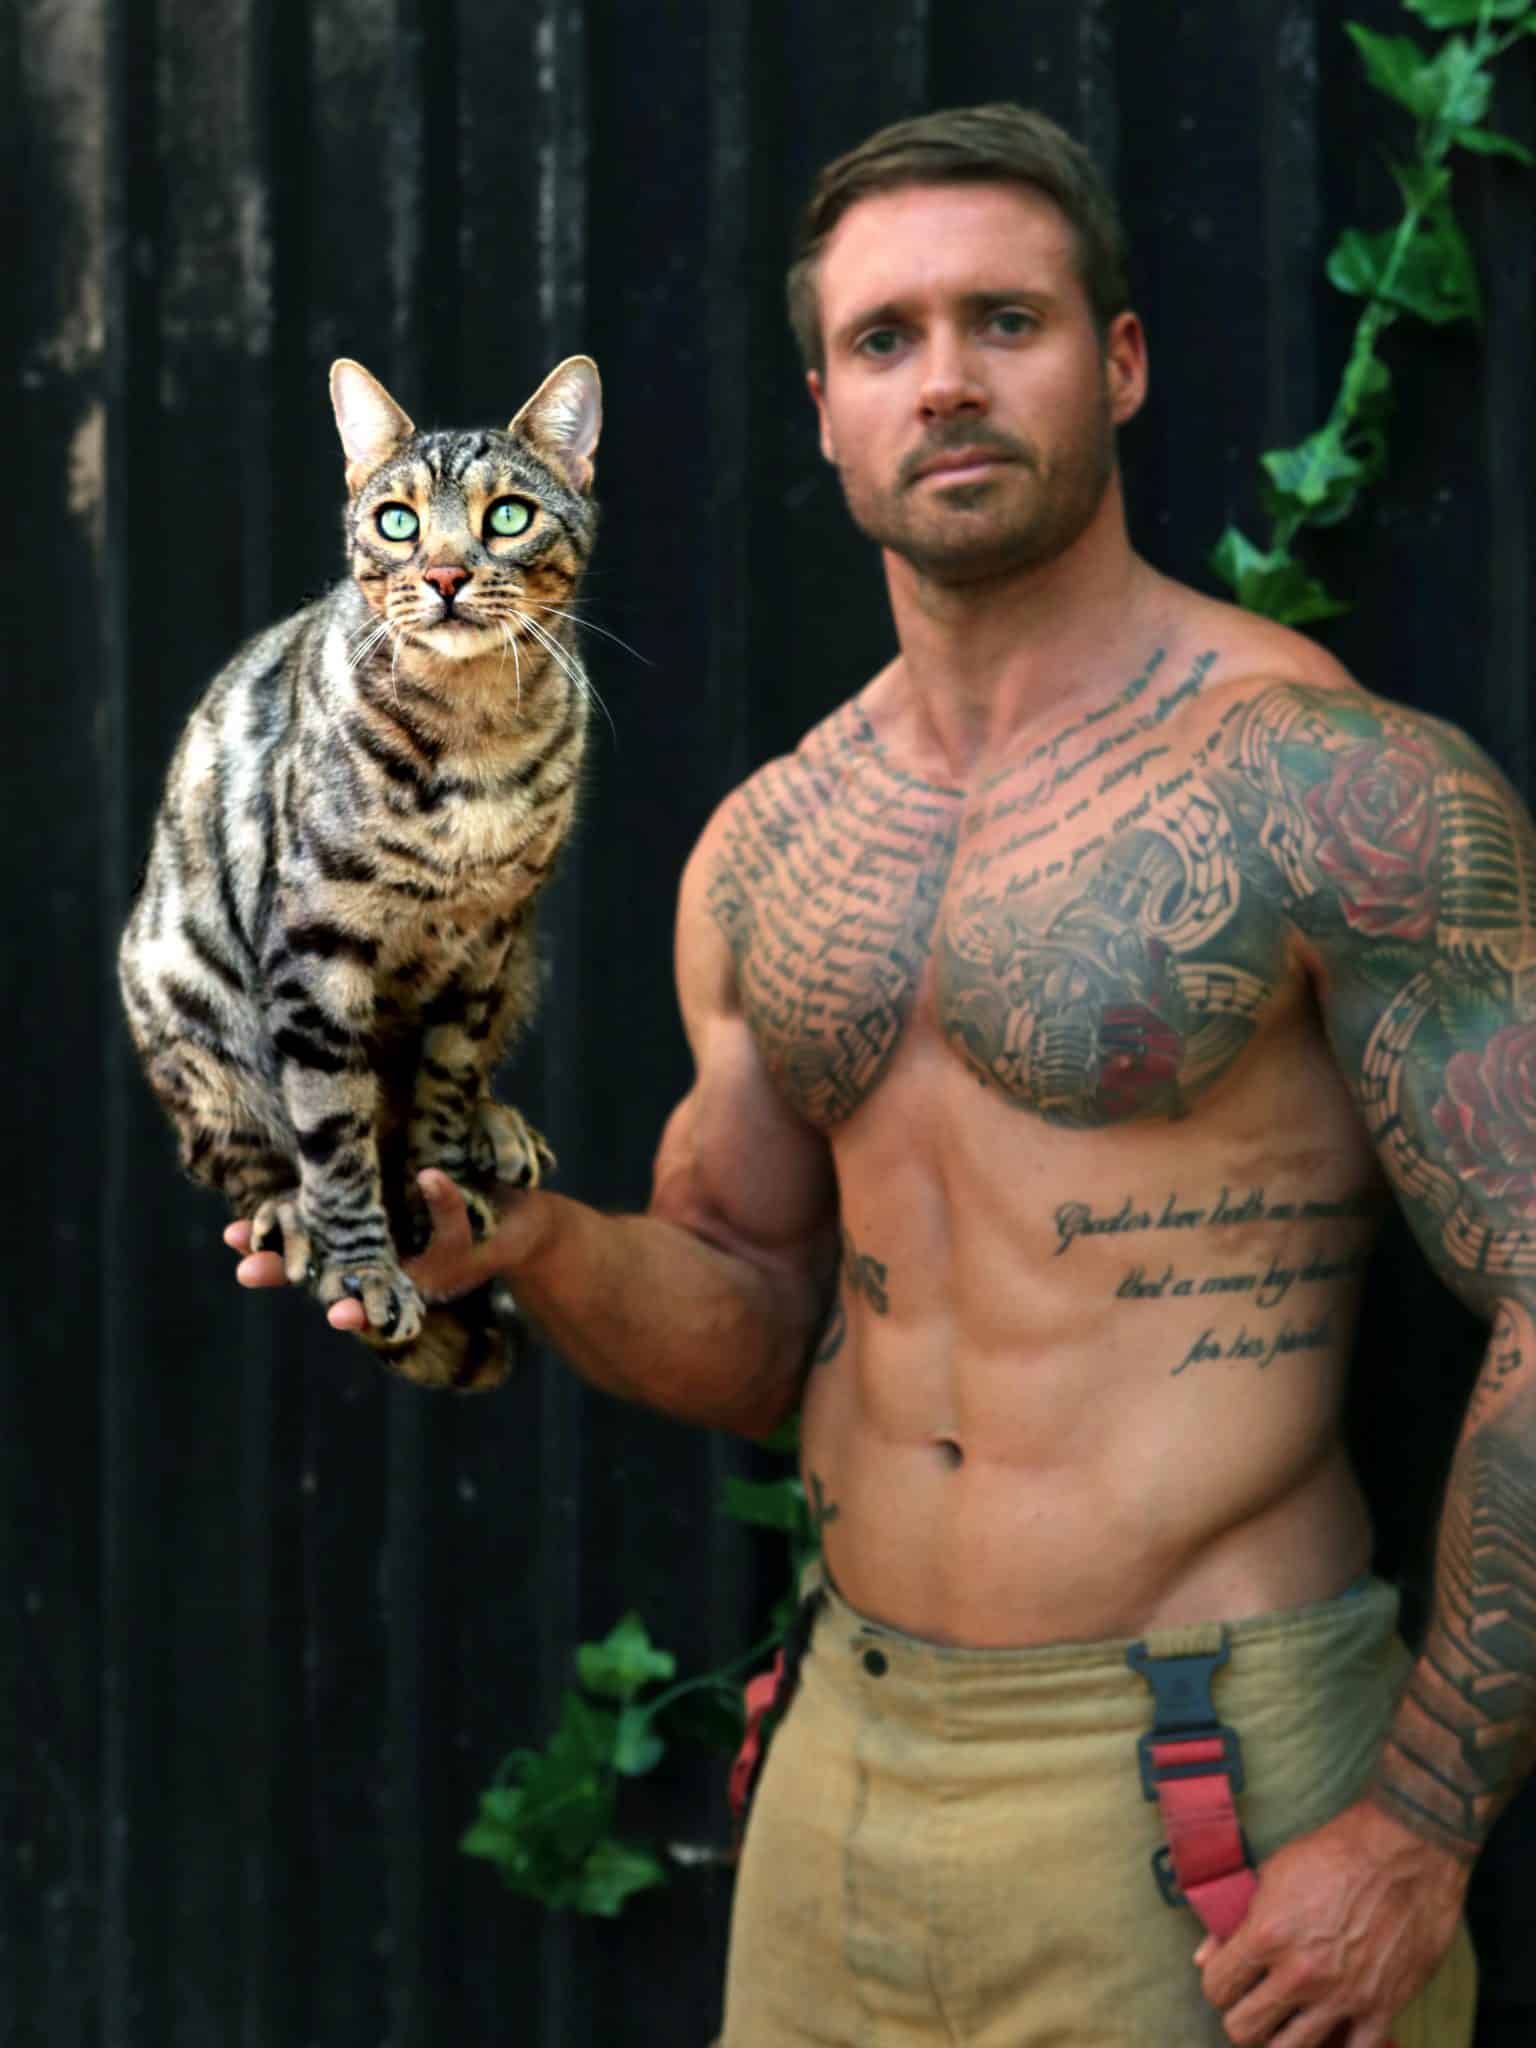 Excited For 2020? Enough To Pose Shirtless With Cats For An Annual